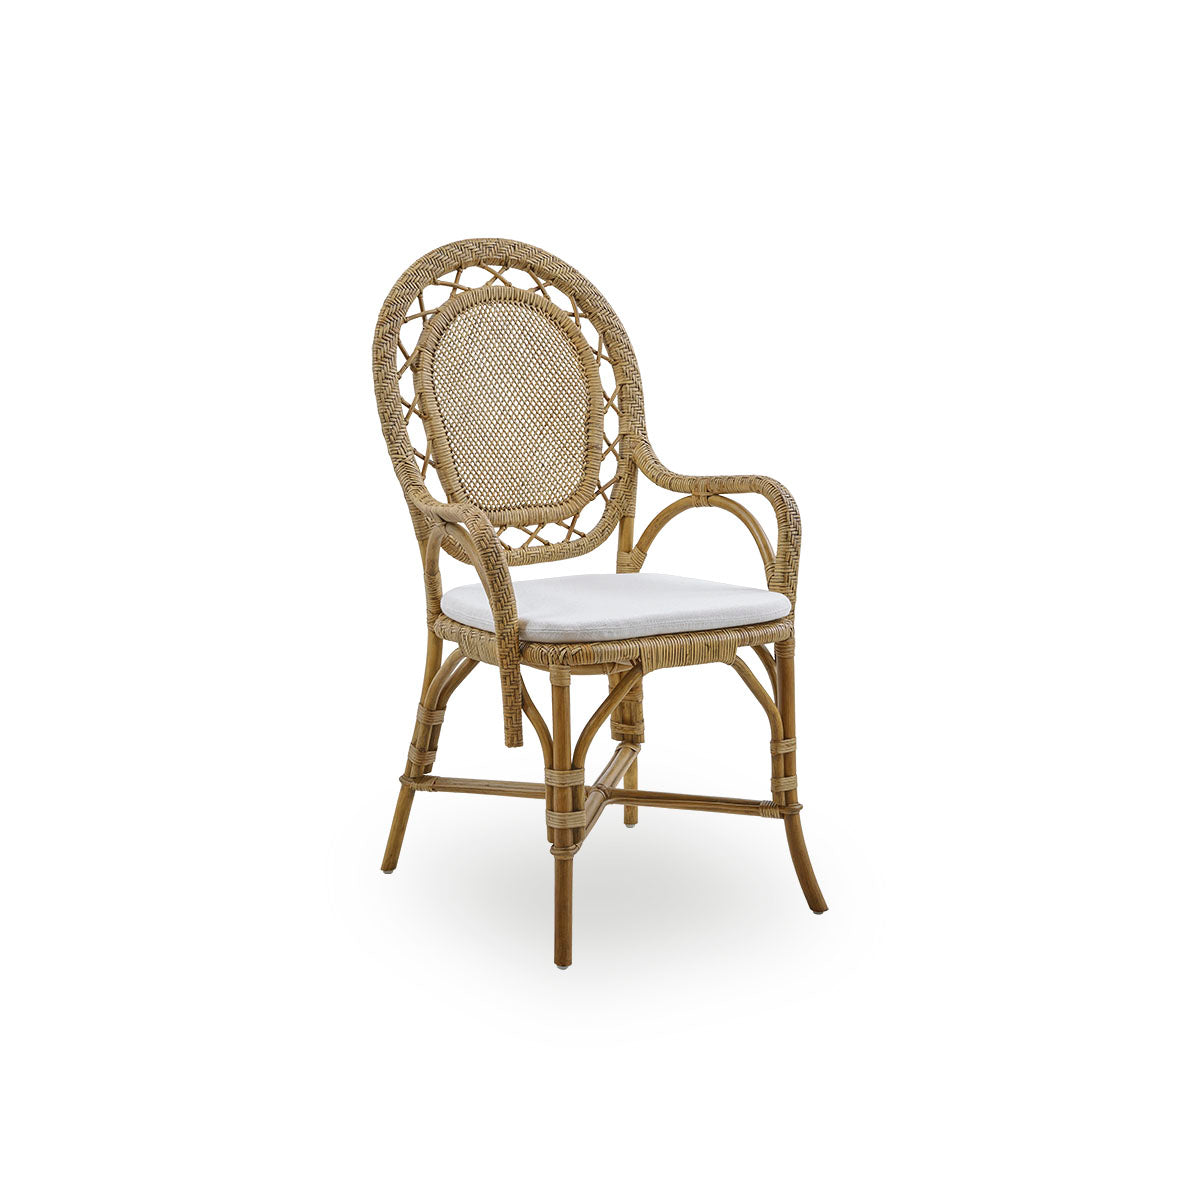 Romantica Dining Chair | Seat cushion by Sika